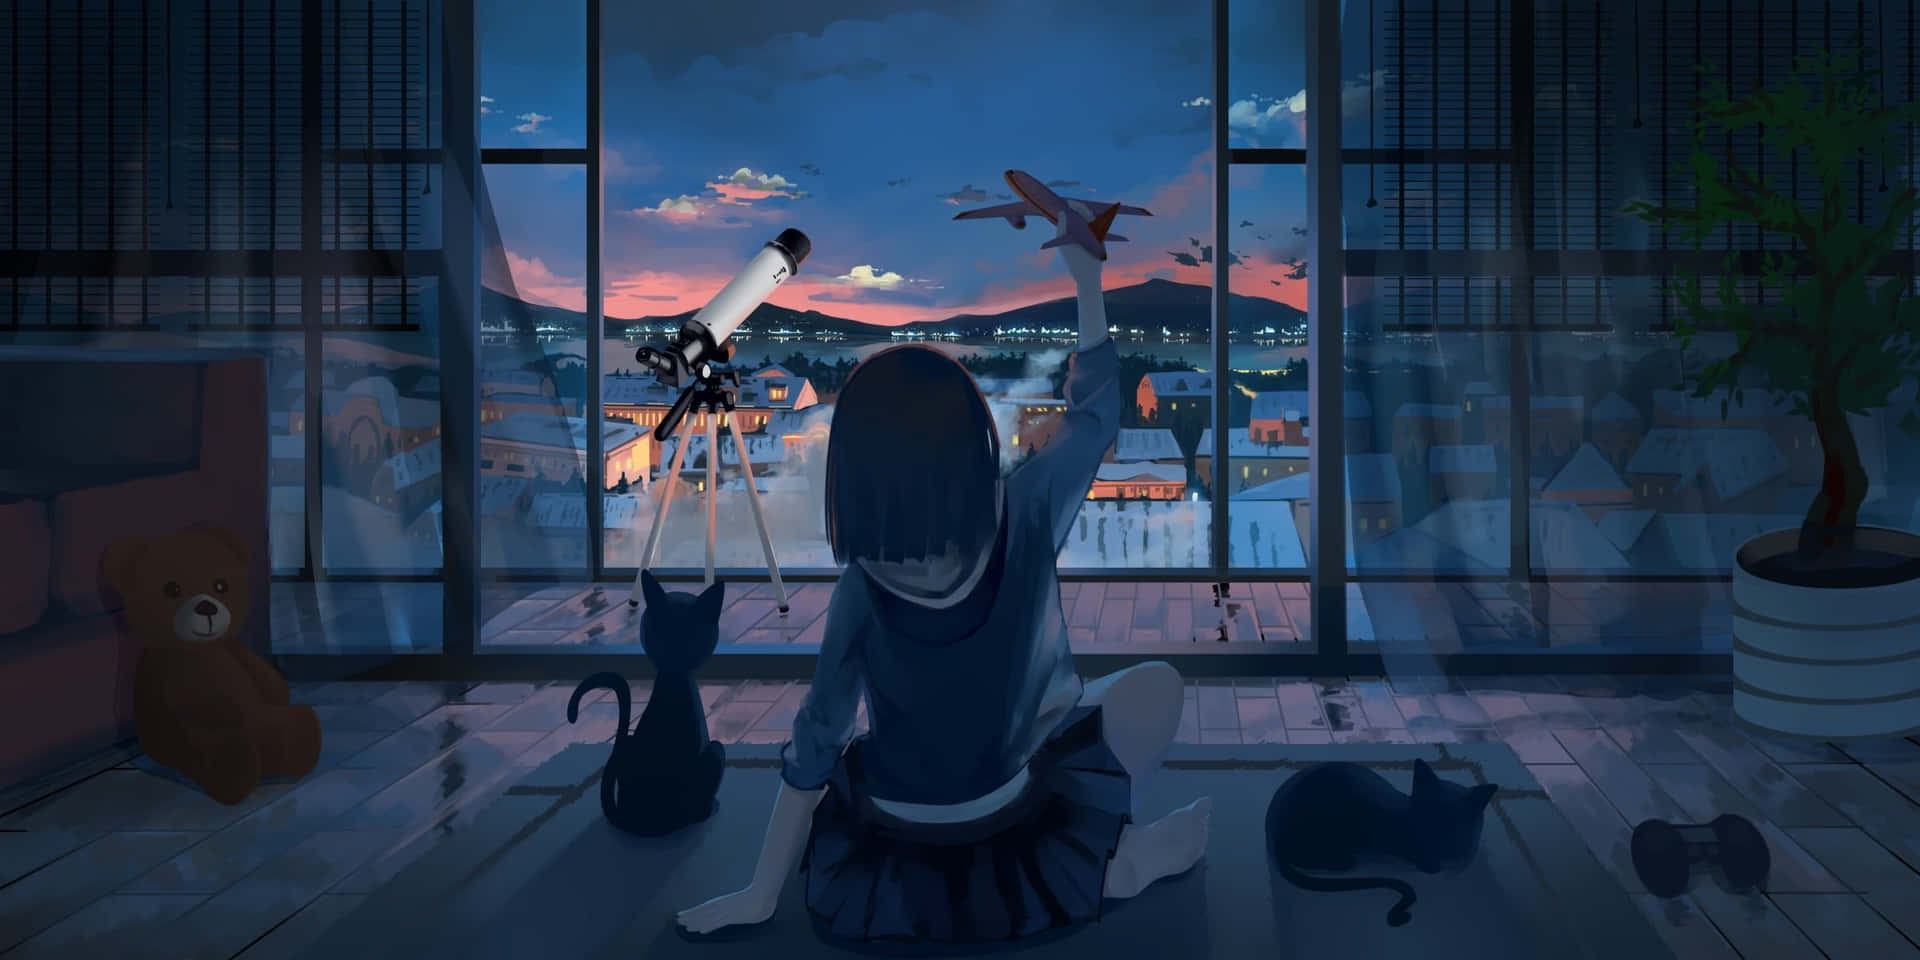 A Girl Sitting On The Floor Watching A Plane Fly Over The City Wallpaper